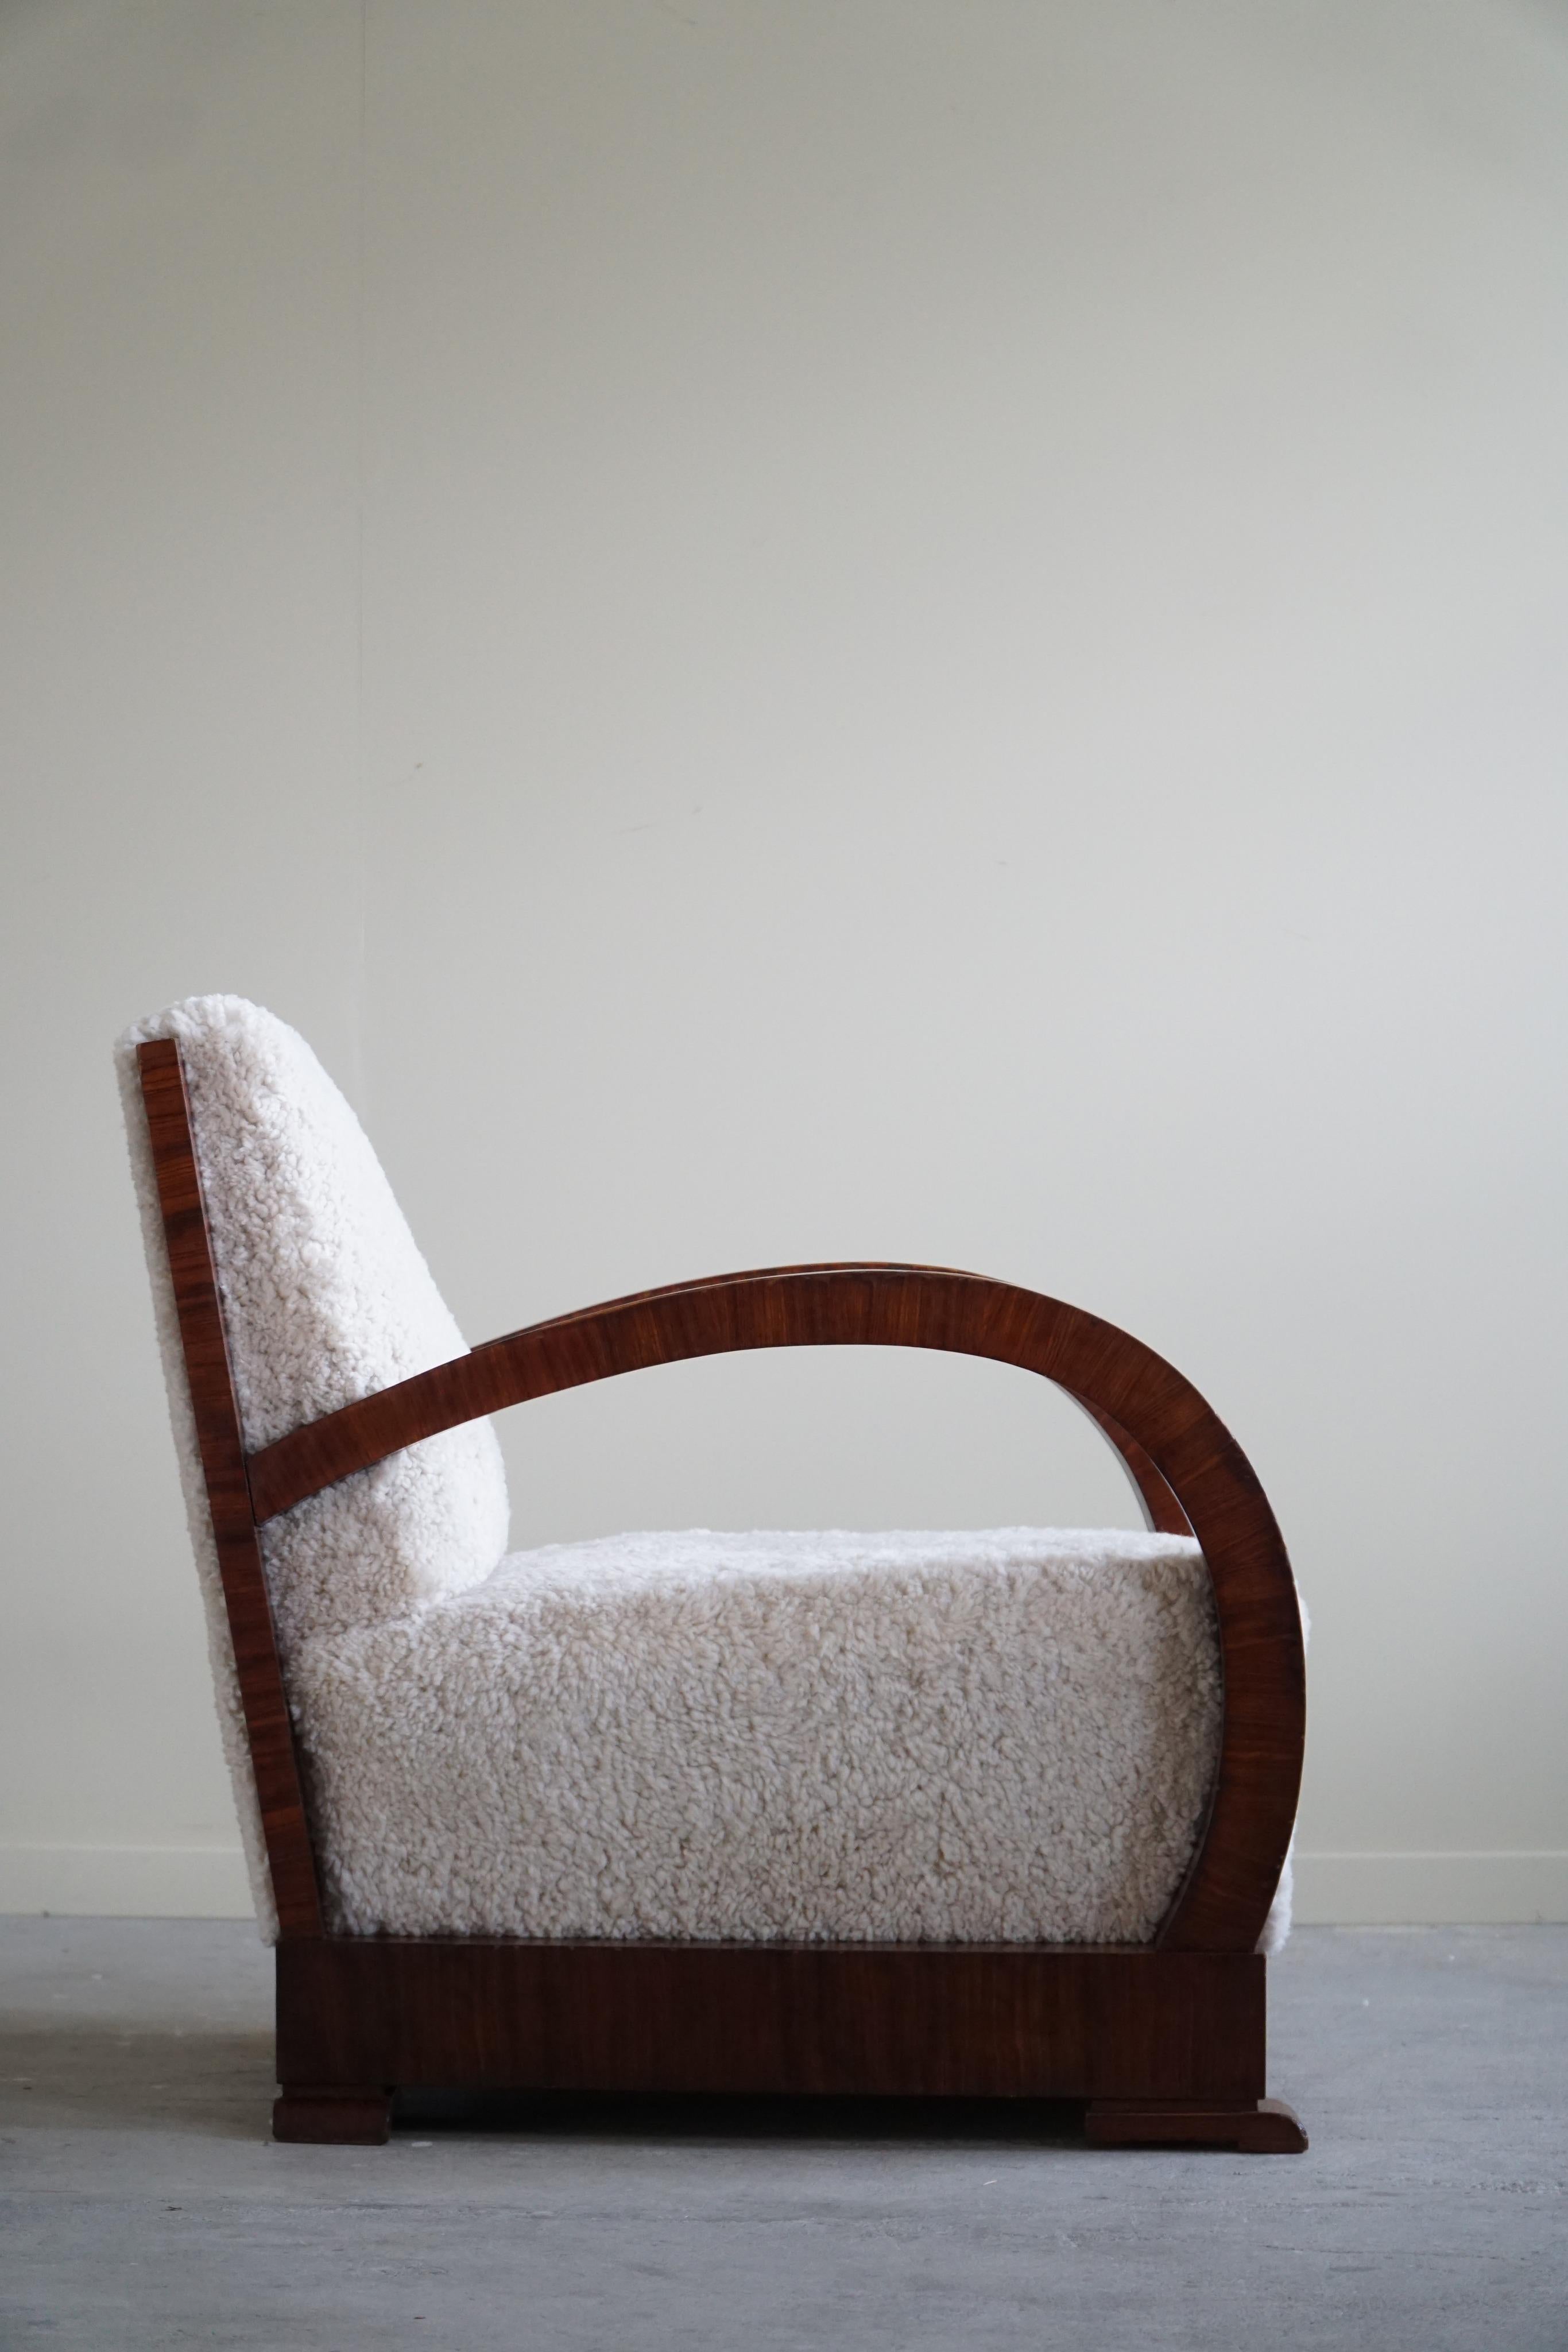 Pair of Danish Lounge Chairs, Reupholstered, Lambswool & Walnut, Art Deco, 1930s For Sale 8